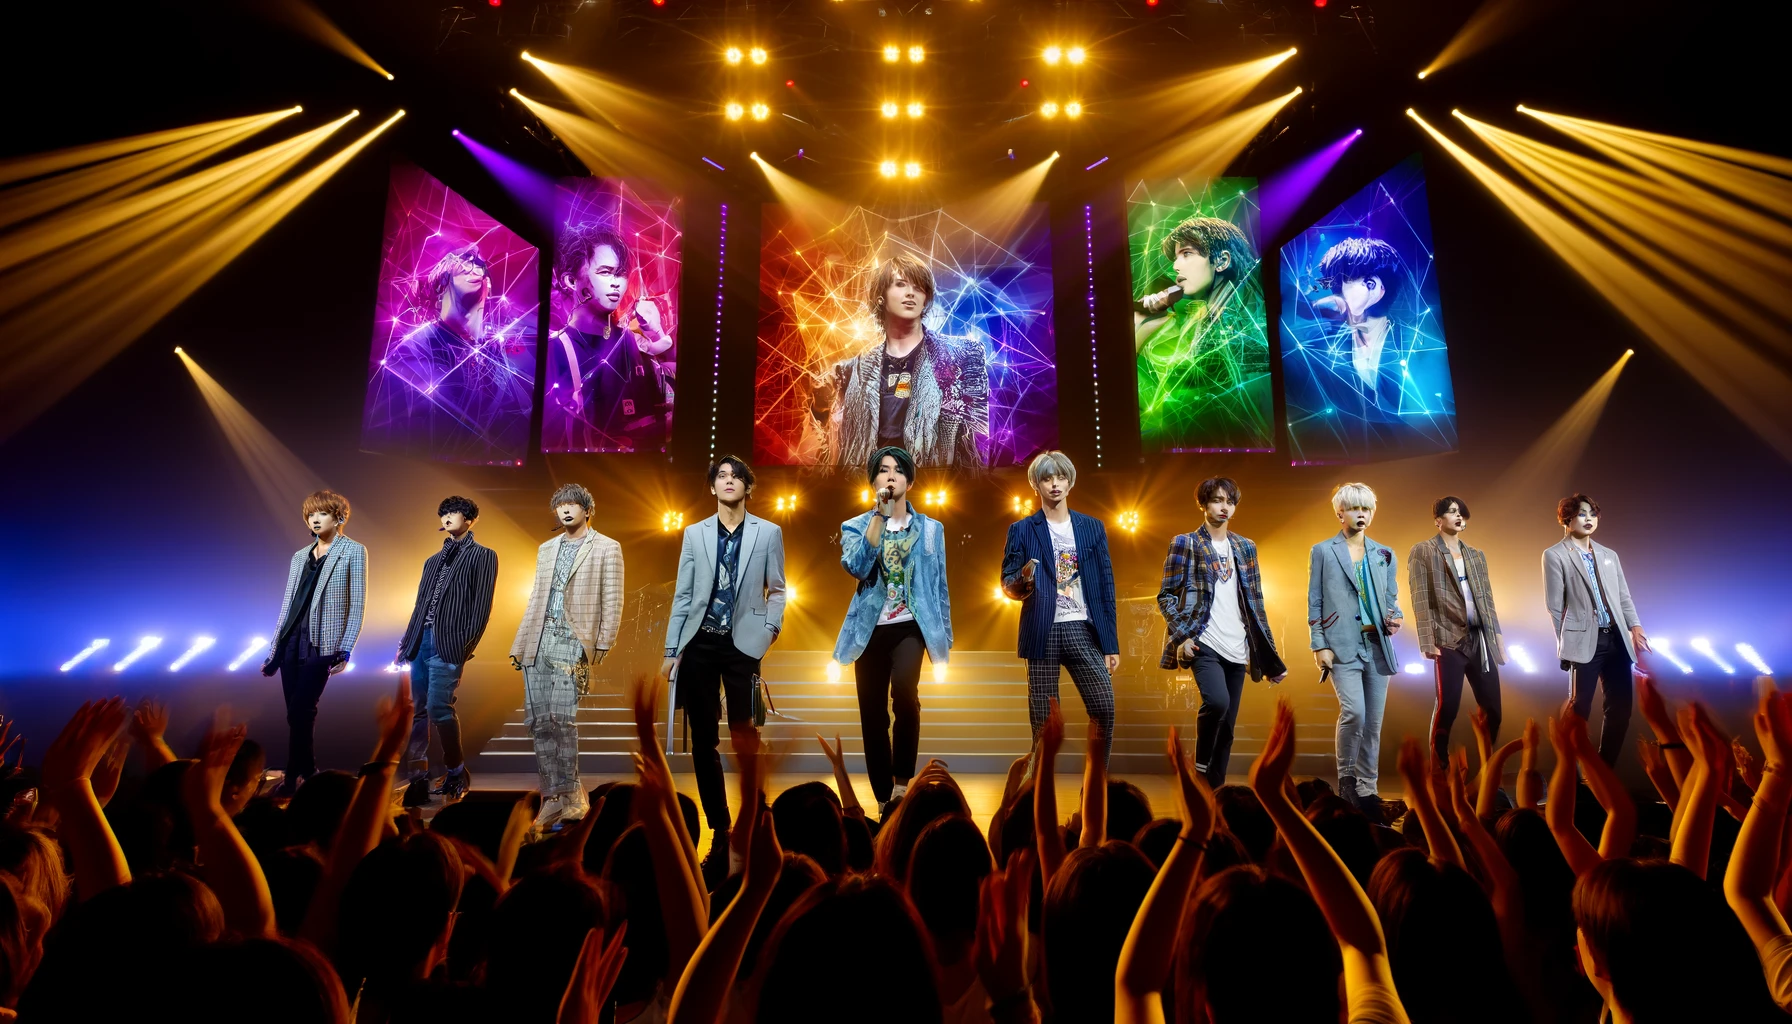 A vibrant and dynamic scene featuring a popular Japanese male idol group on stage during a concert. The group consists of five young men, each with distinct fashion styles ranging from stylish streetwear to sophisticated suits. The stage is brightly lit with colorful lights, and the background displays large LED screens showing abstract visuals. The audience in the foreground is cheering enthusiastically. The setting captures the energy and excitement typical of a pop concert in Japan.